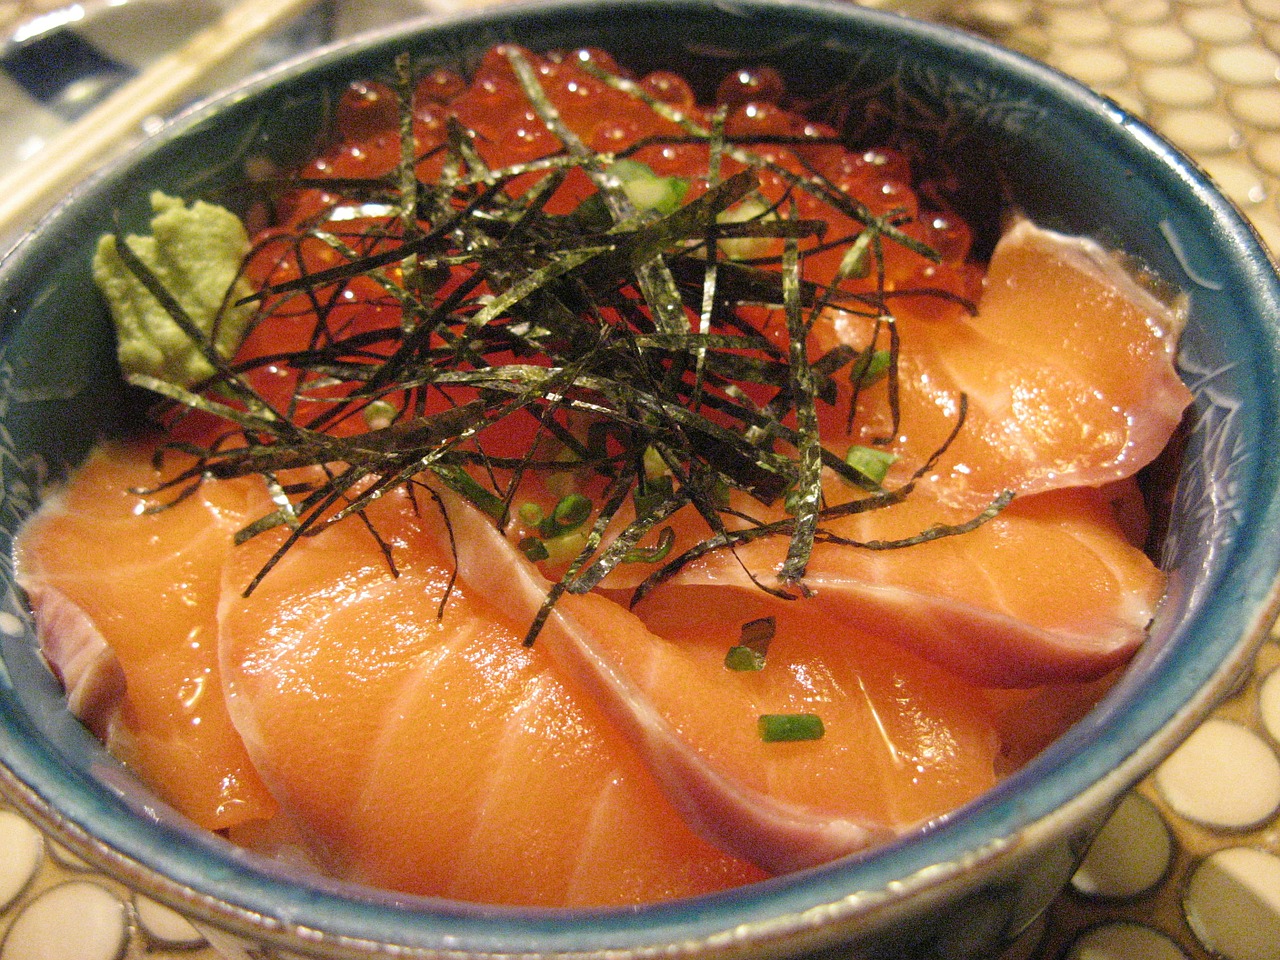 You can do a lot with salmon roe, but it always pairs well with fresh salmon and nori.